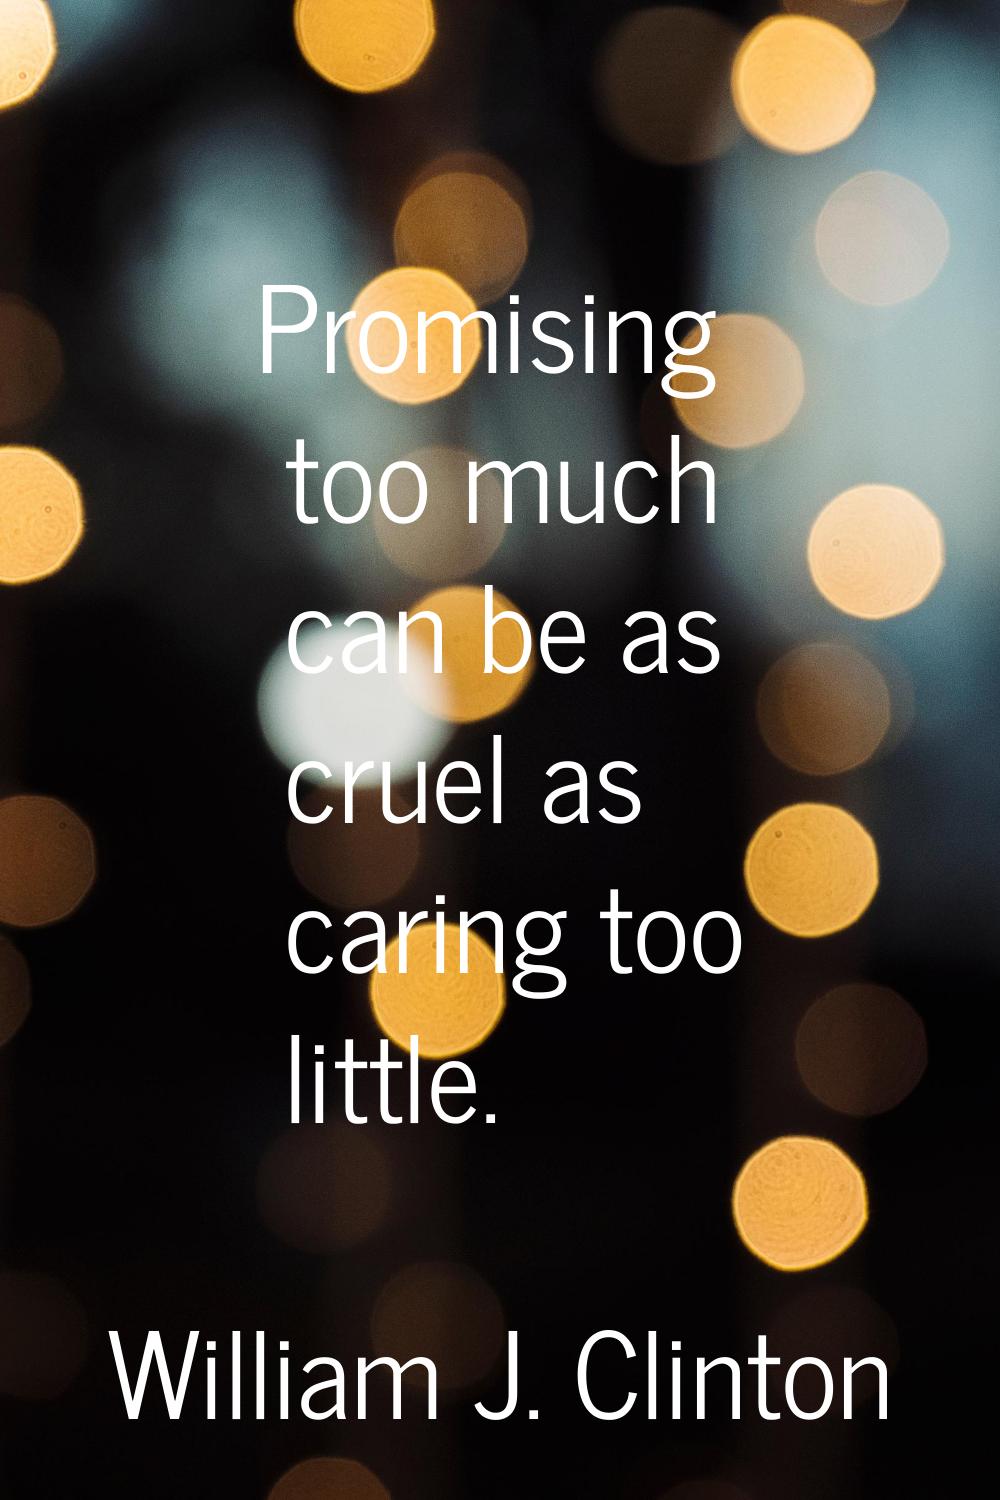 Promising too much can be as cruel as caring too little.